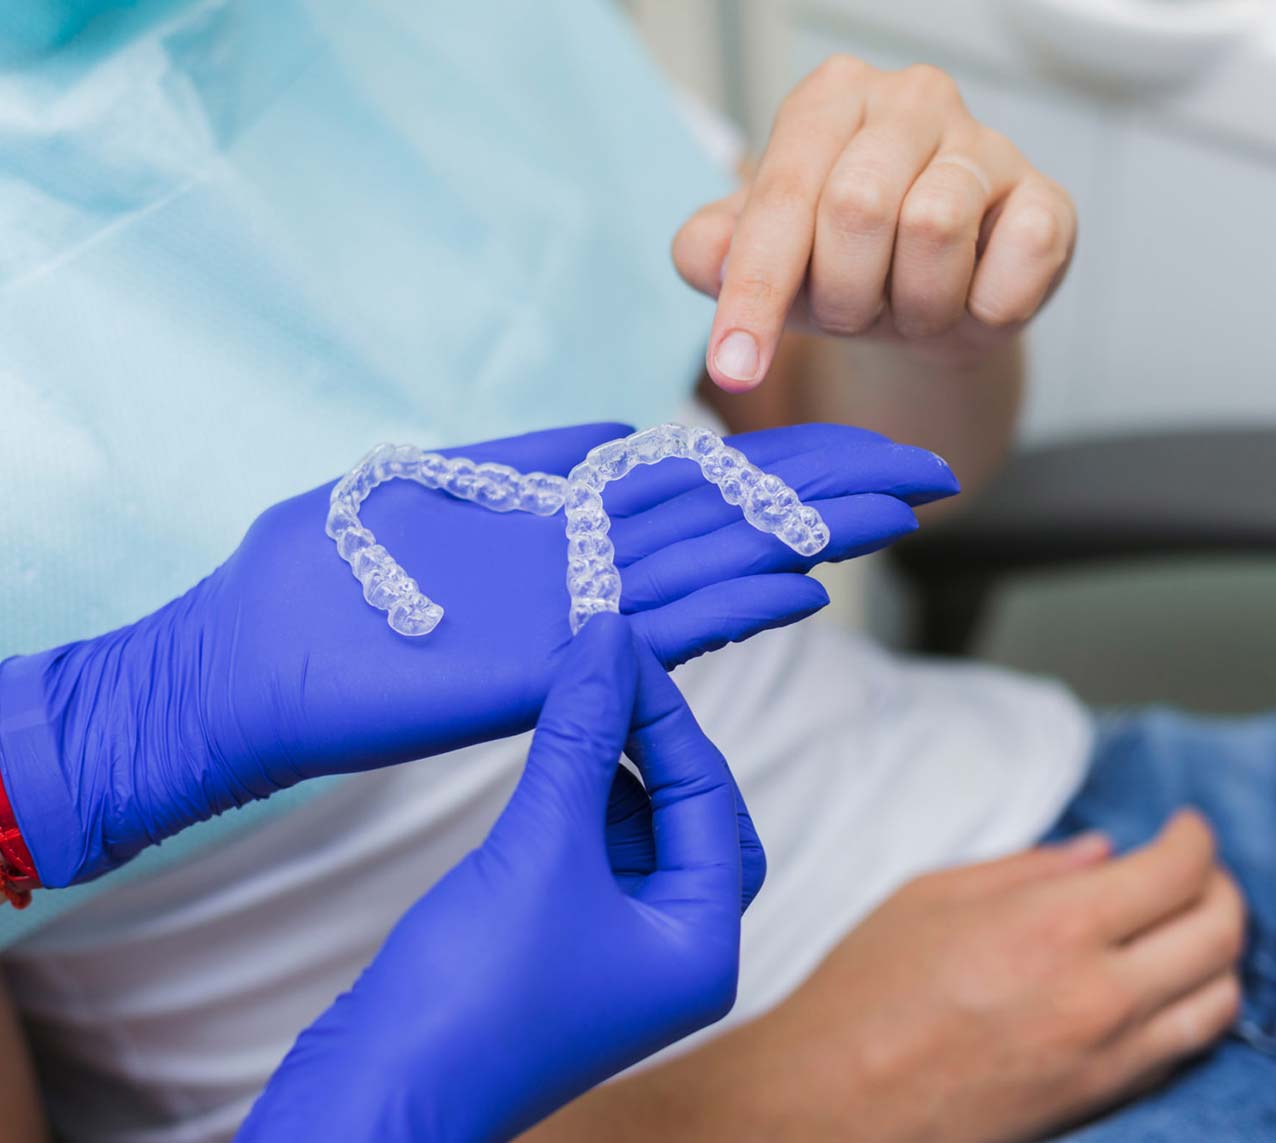 Invisalign clear retainer trays in dentists hands